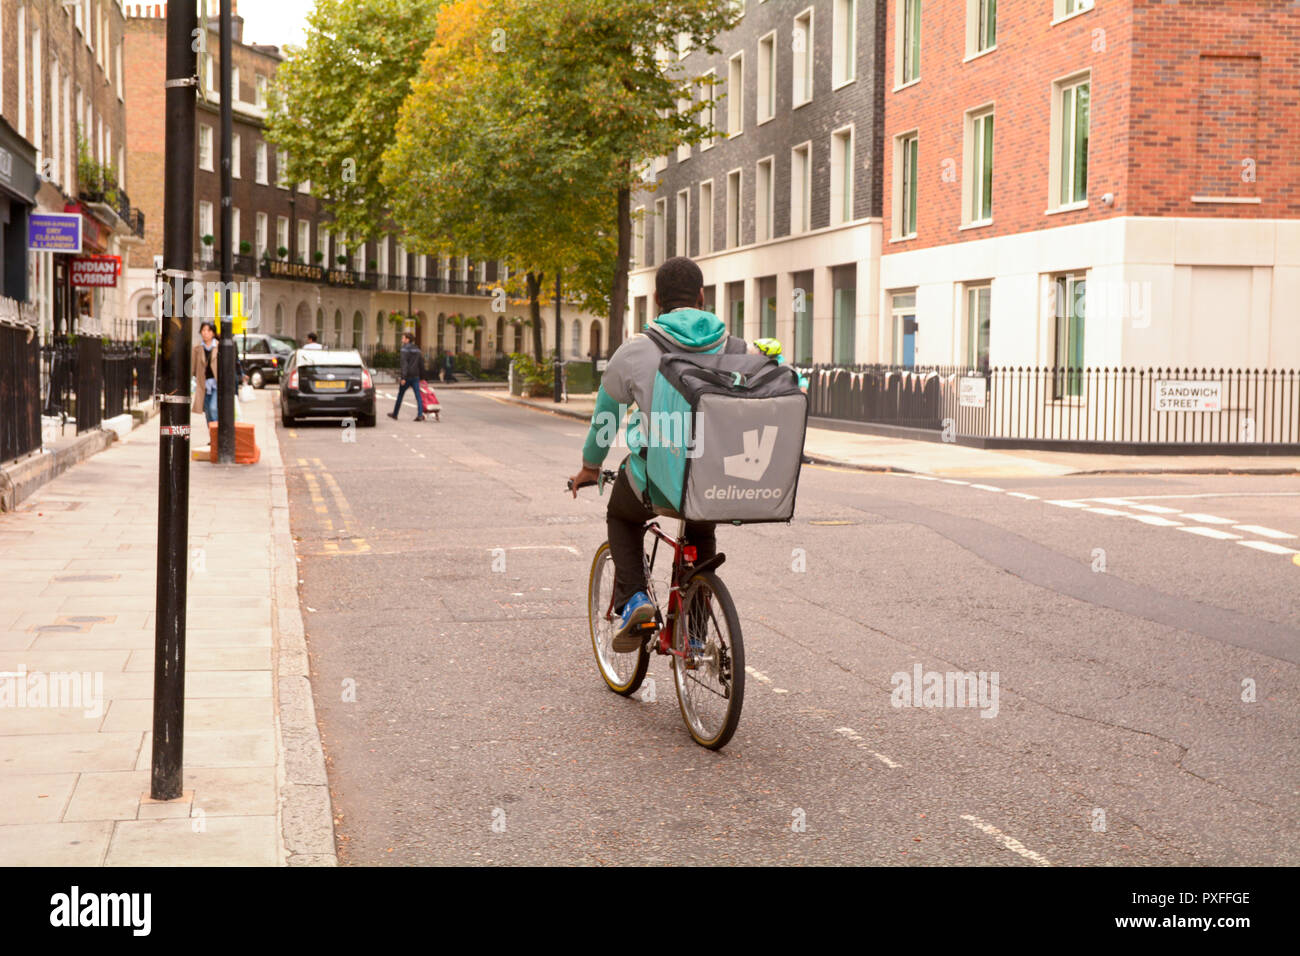 Deliveroo delivery driver on bicyclenear to Sandwich Street  in London, England Stock Photo